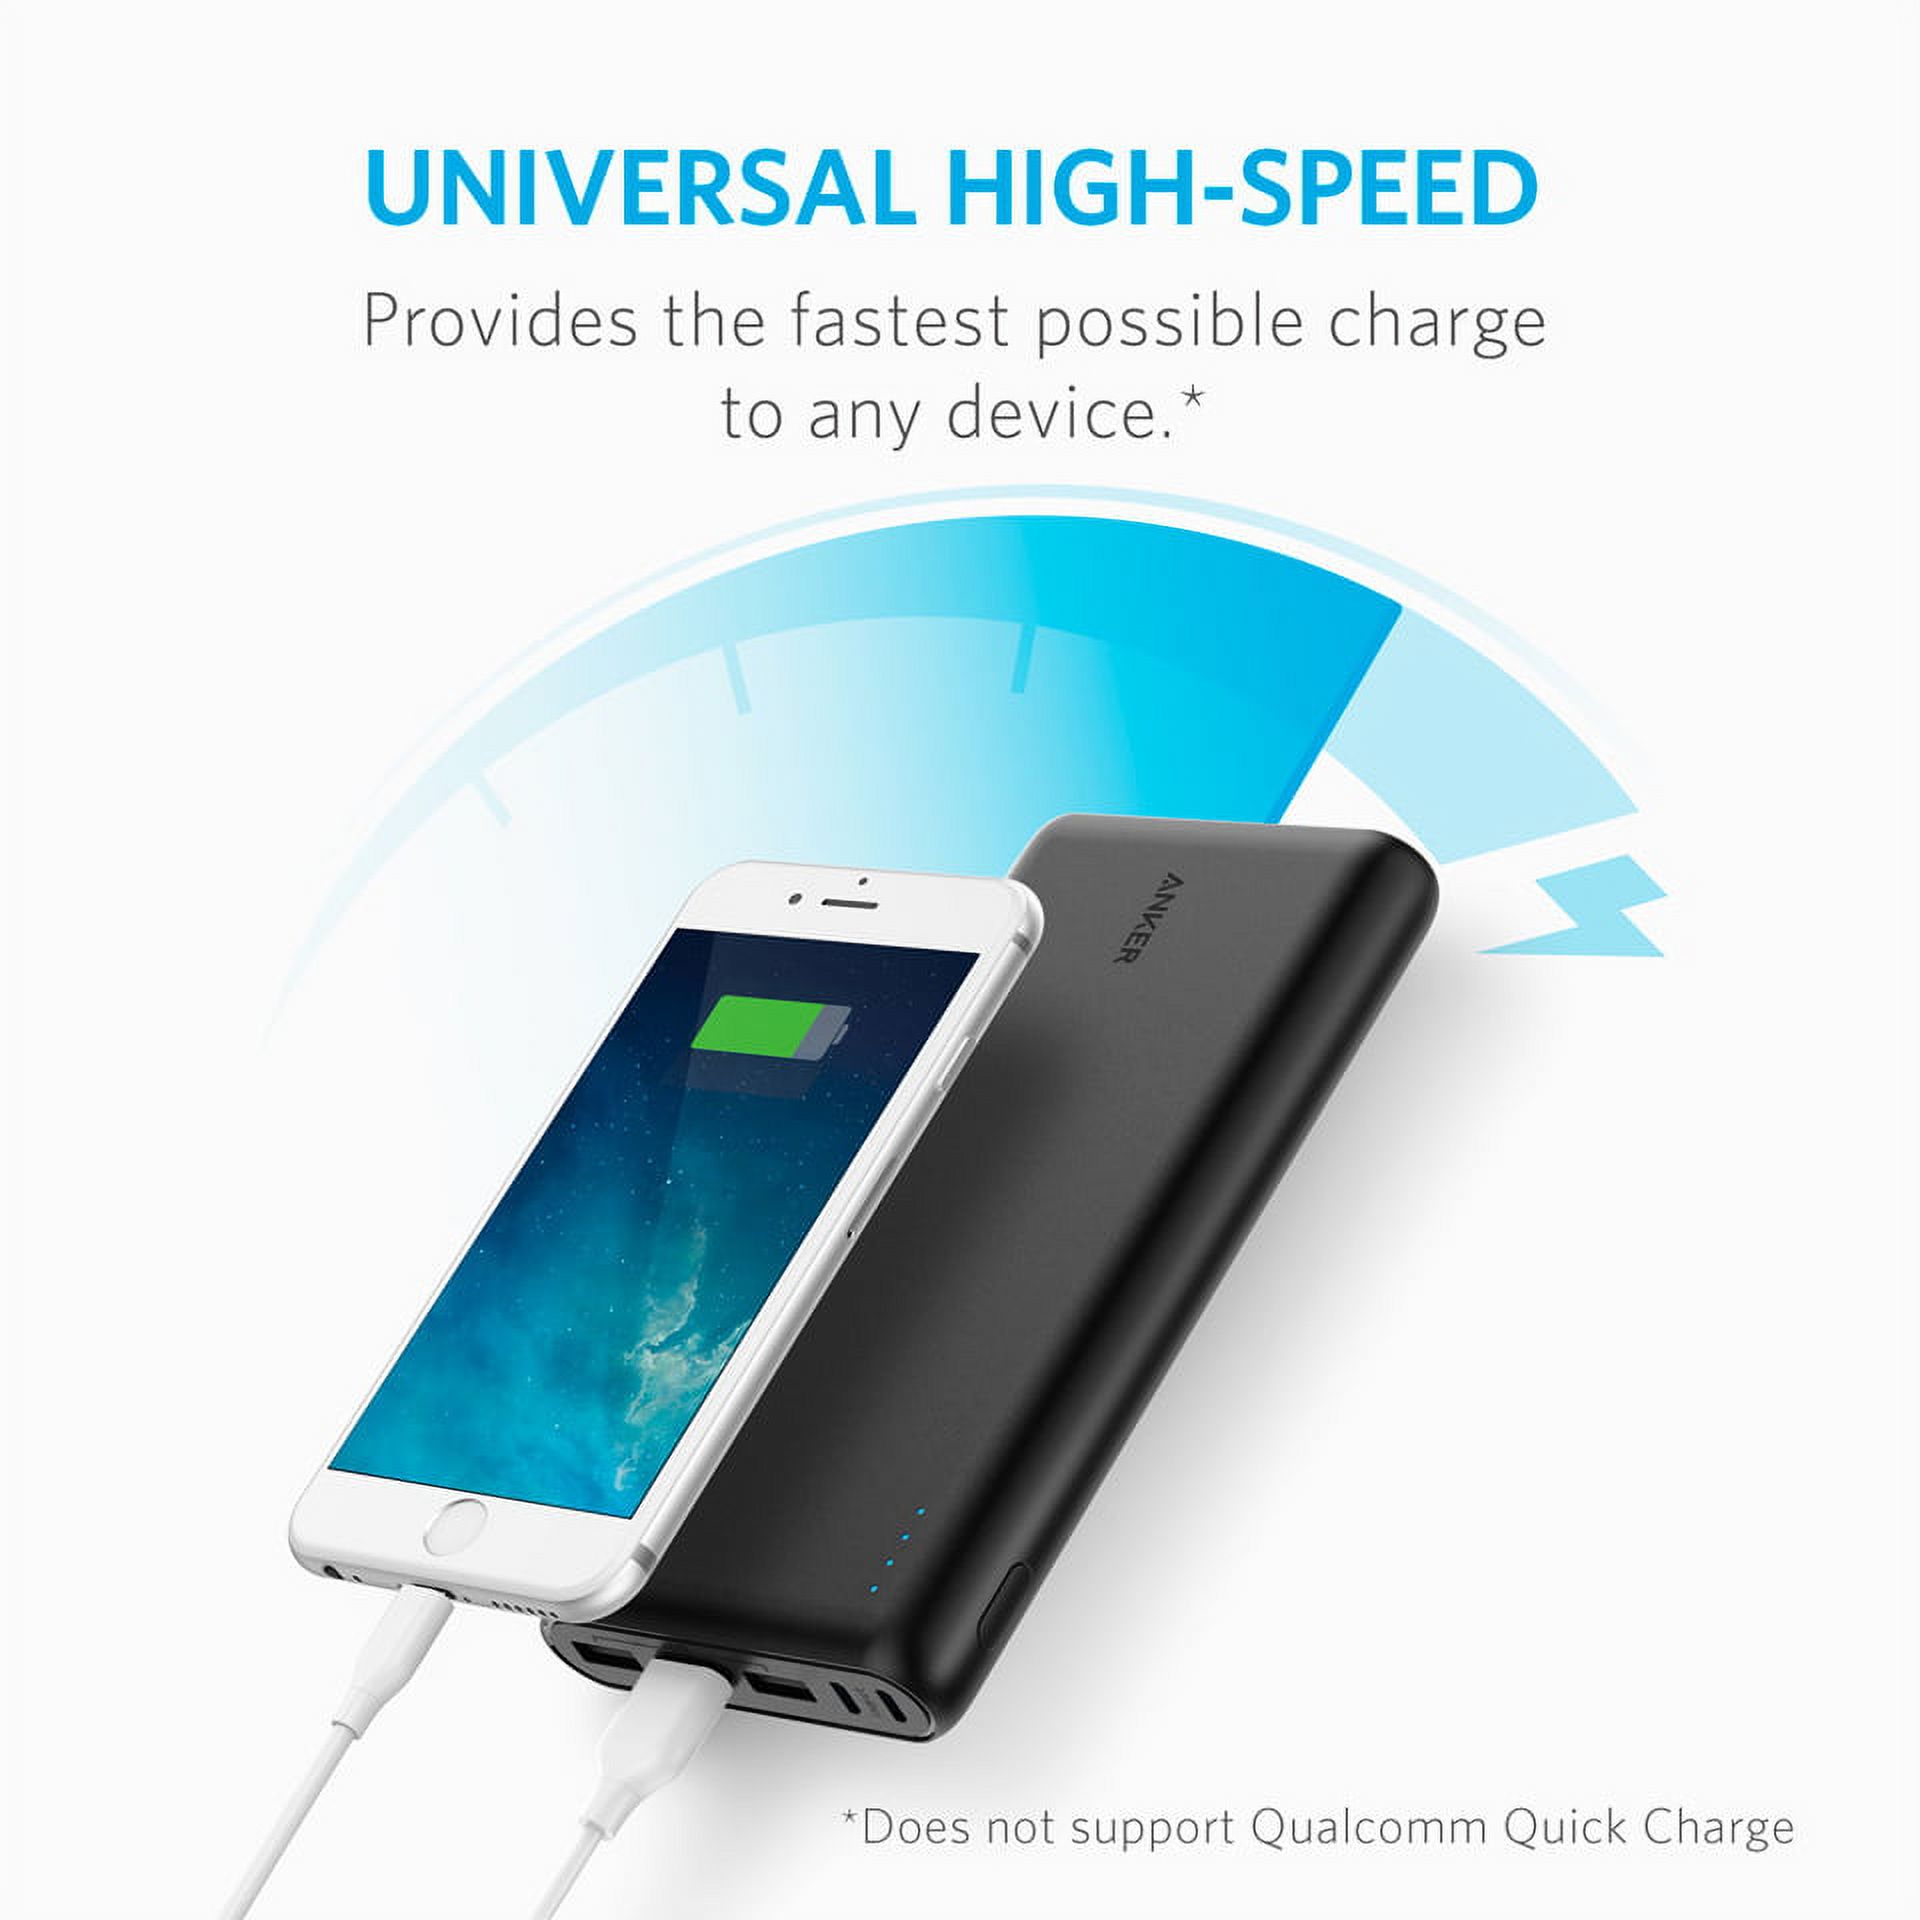 Anker PowerCore 26800 Portable Charger, 26800mAh External Battery with Dual Input Port and 3 USB Output Port - image 3 of 7